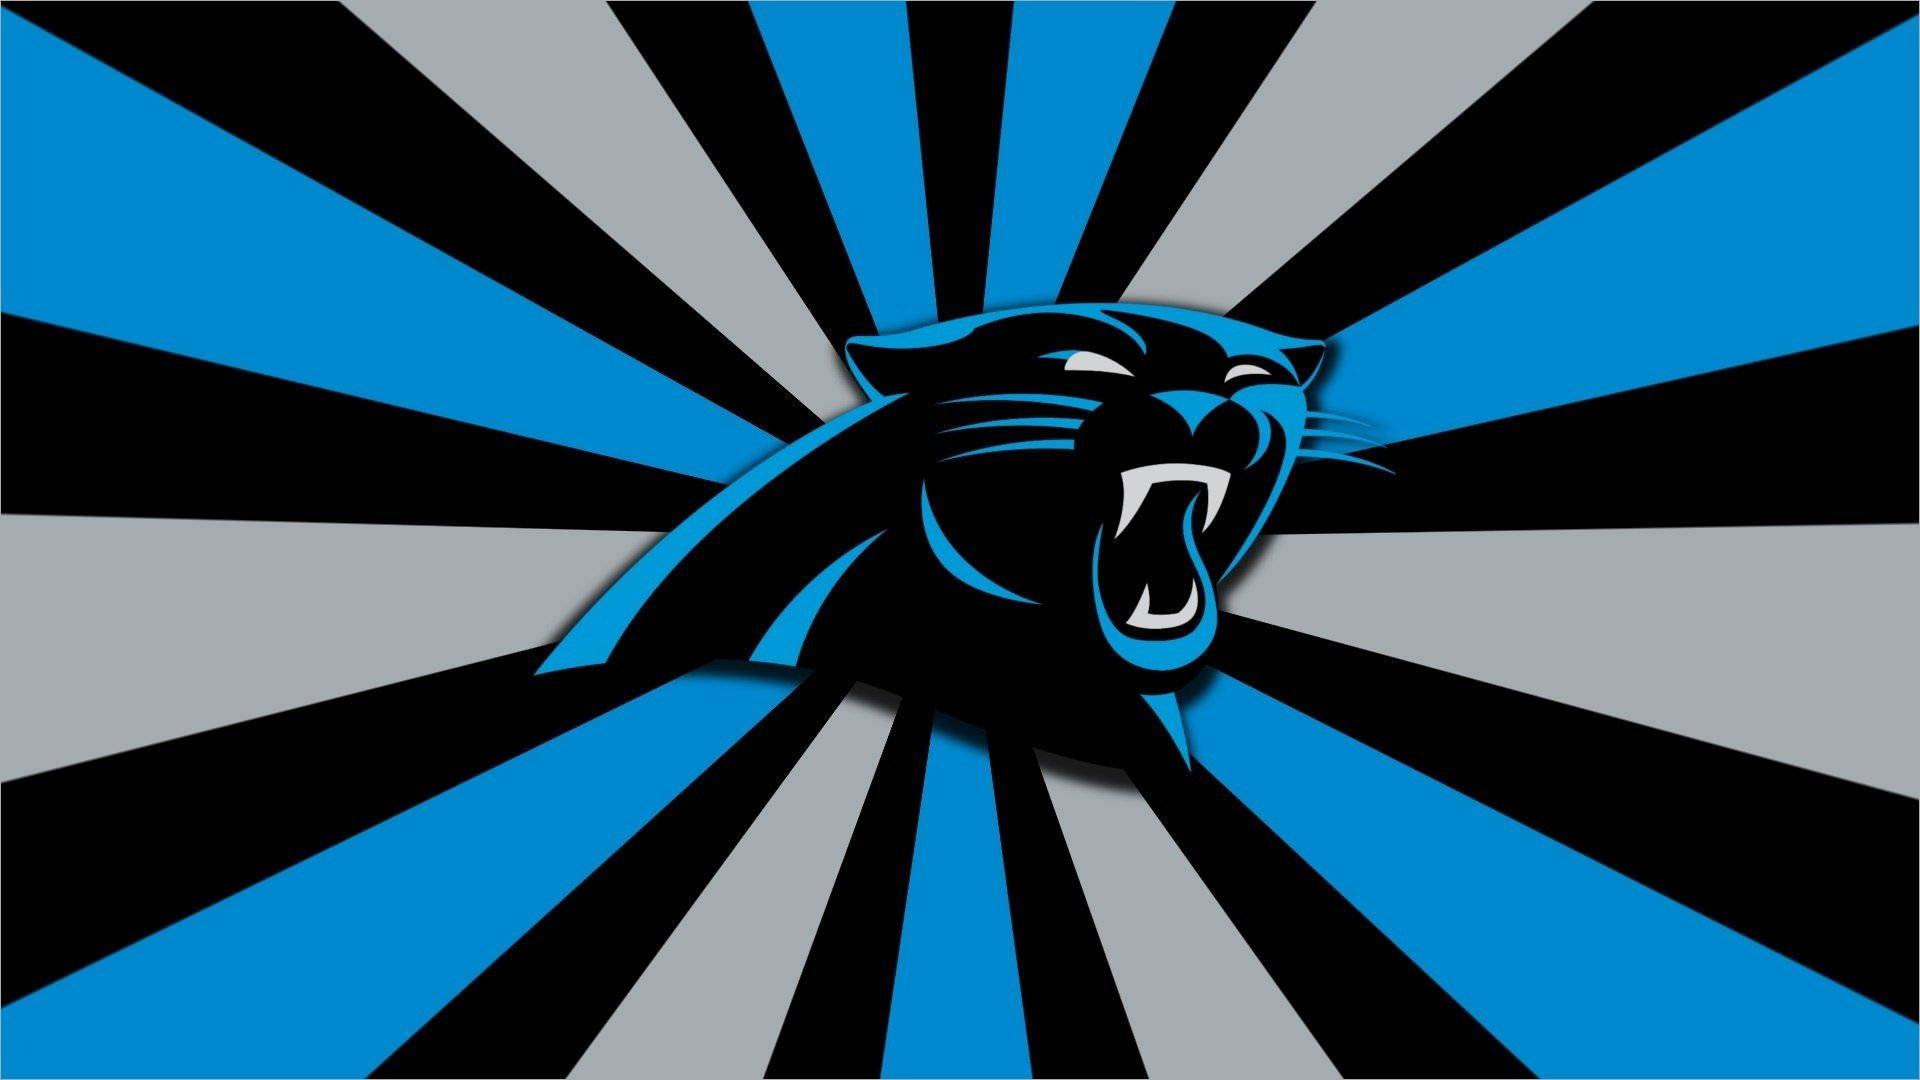 High resolution Carolina Panthers 1080p wallpaper for PC